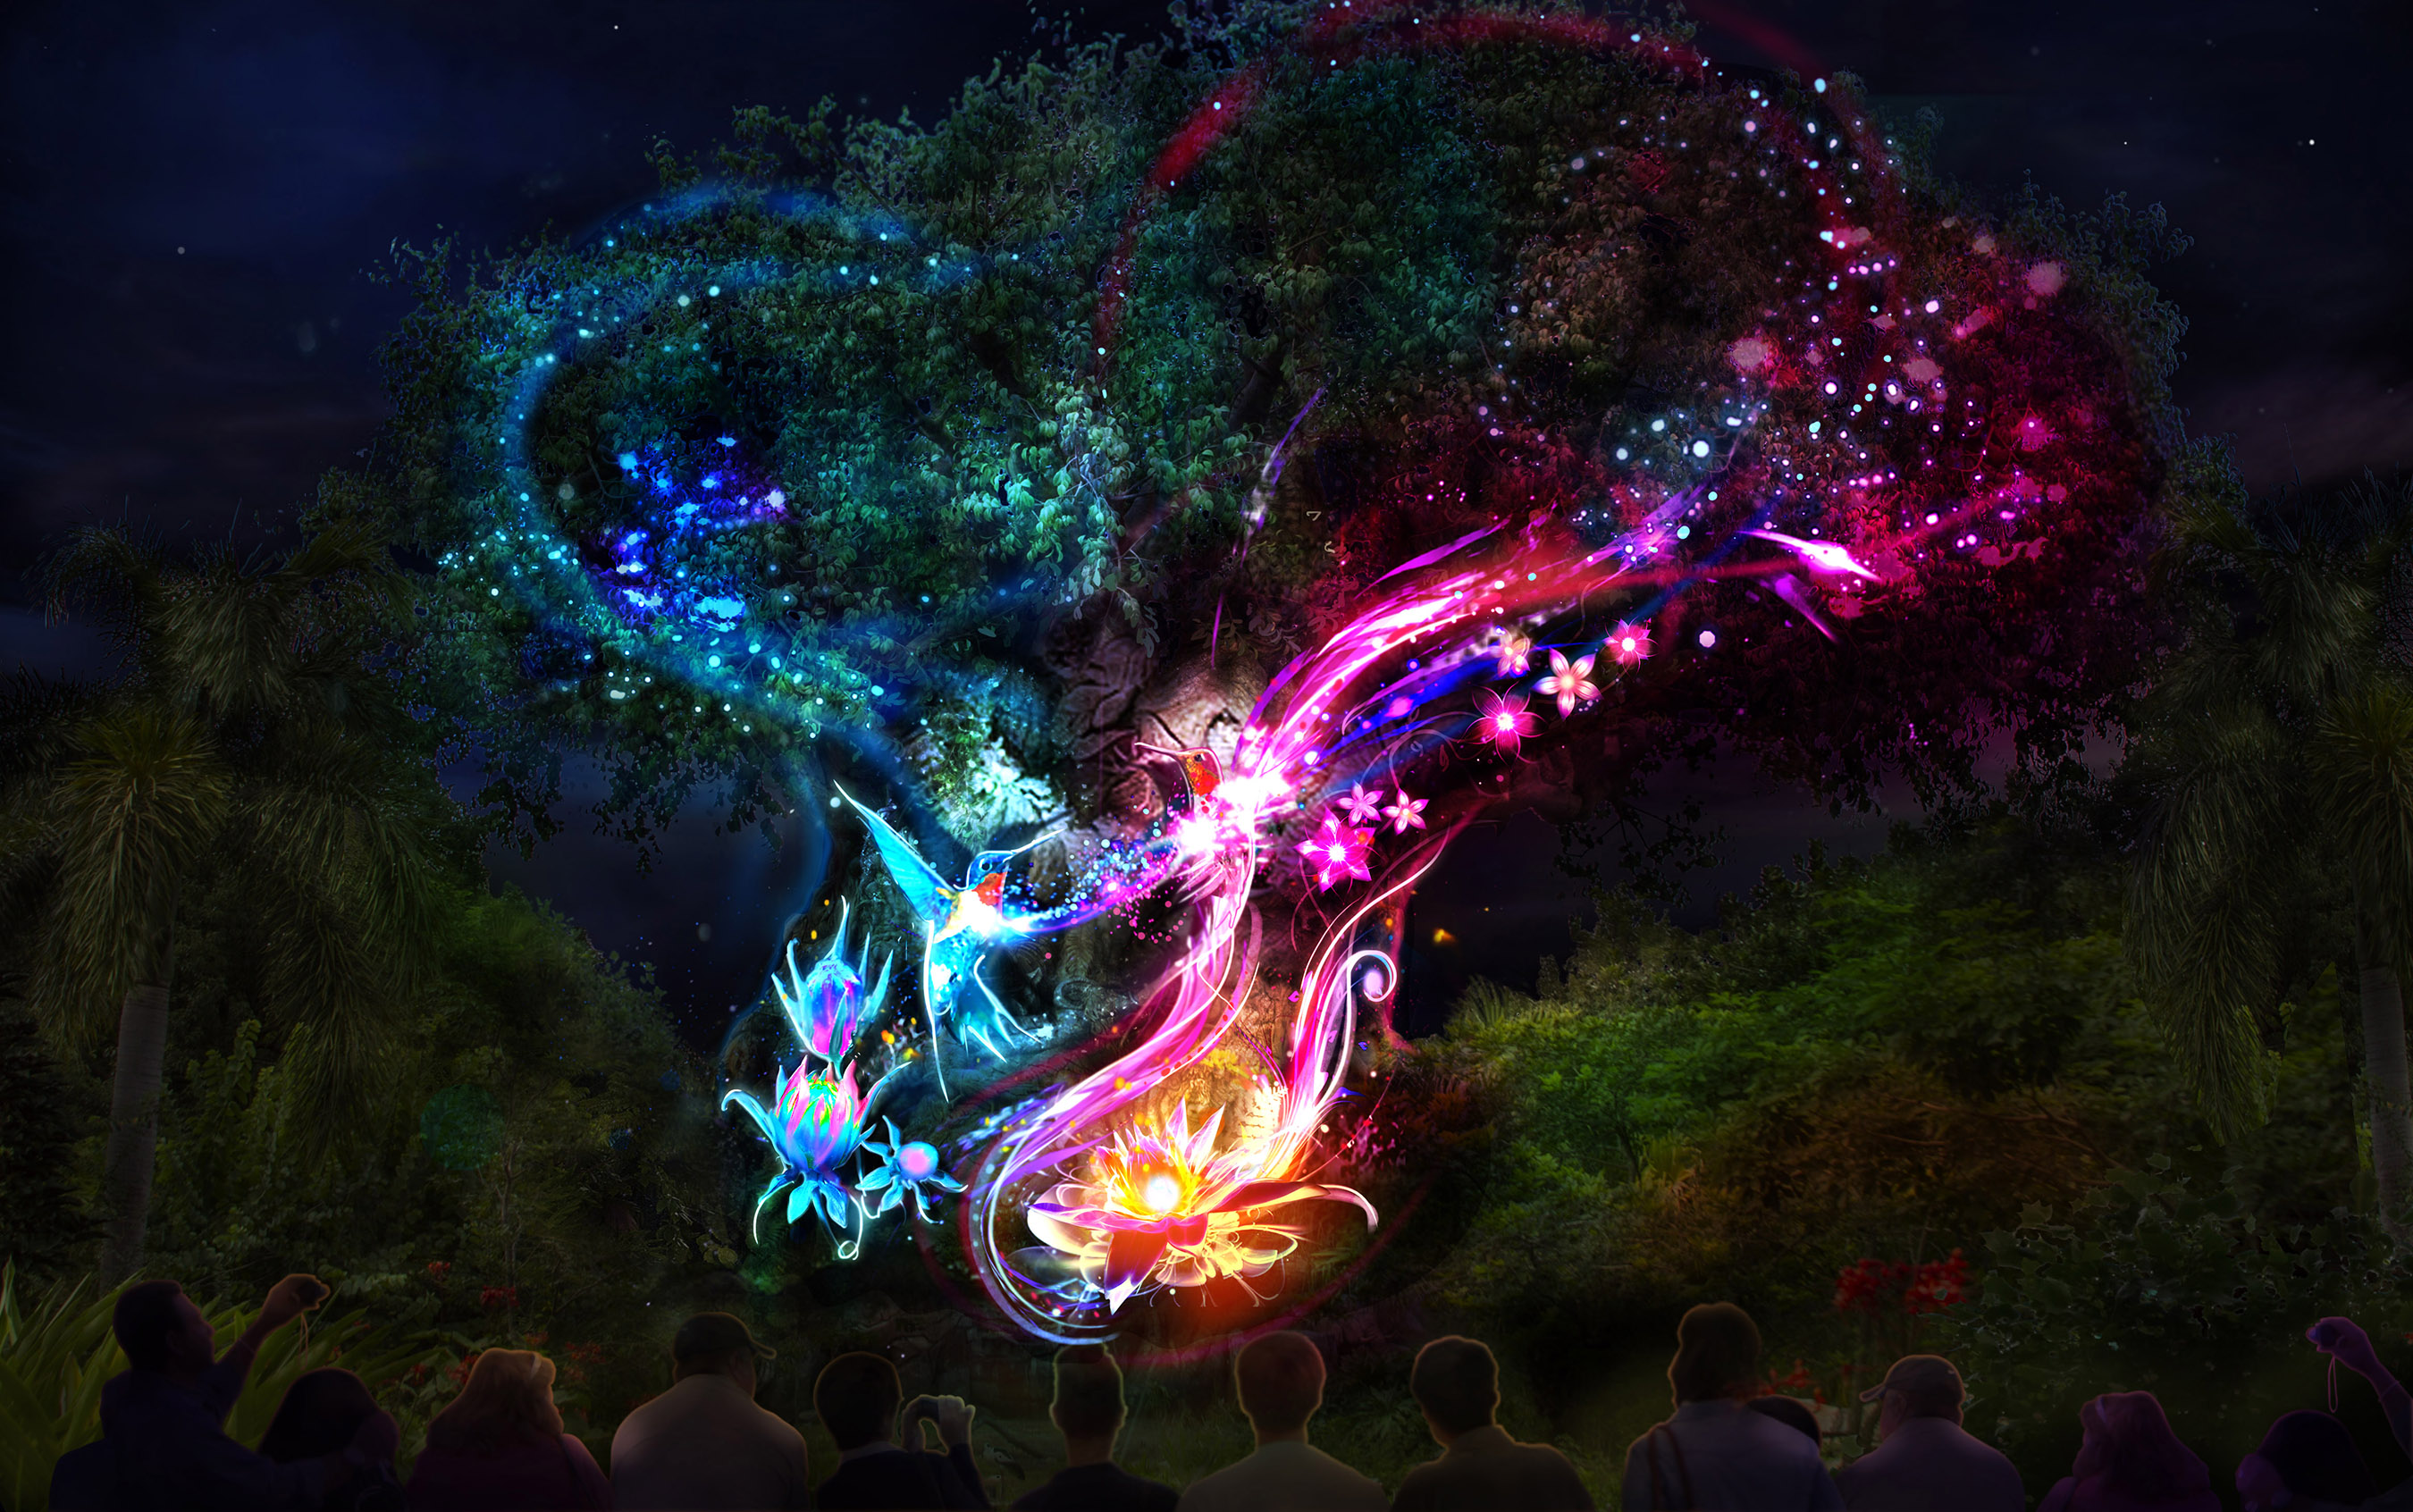 The iconic Tree of Life at Disney's Animal Kingdom will undergo an amazing awakening starting spring 2016 as the animal spirits of the tree are brought to "light" at night by magical fireflies, revealing moments of wonder and enchantment. Disney's Animal Kingdom is one of four theme parks at Walt Disney World Resort in Lake Buena Vista, Fla. (Disney Parks)